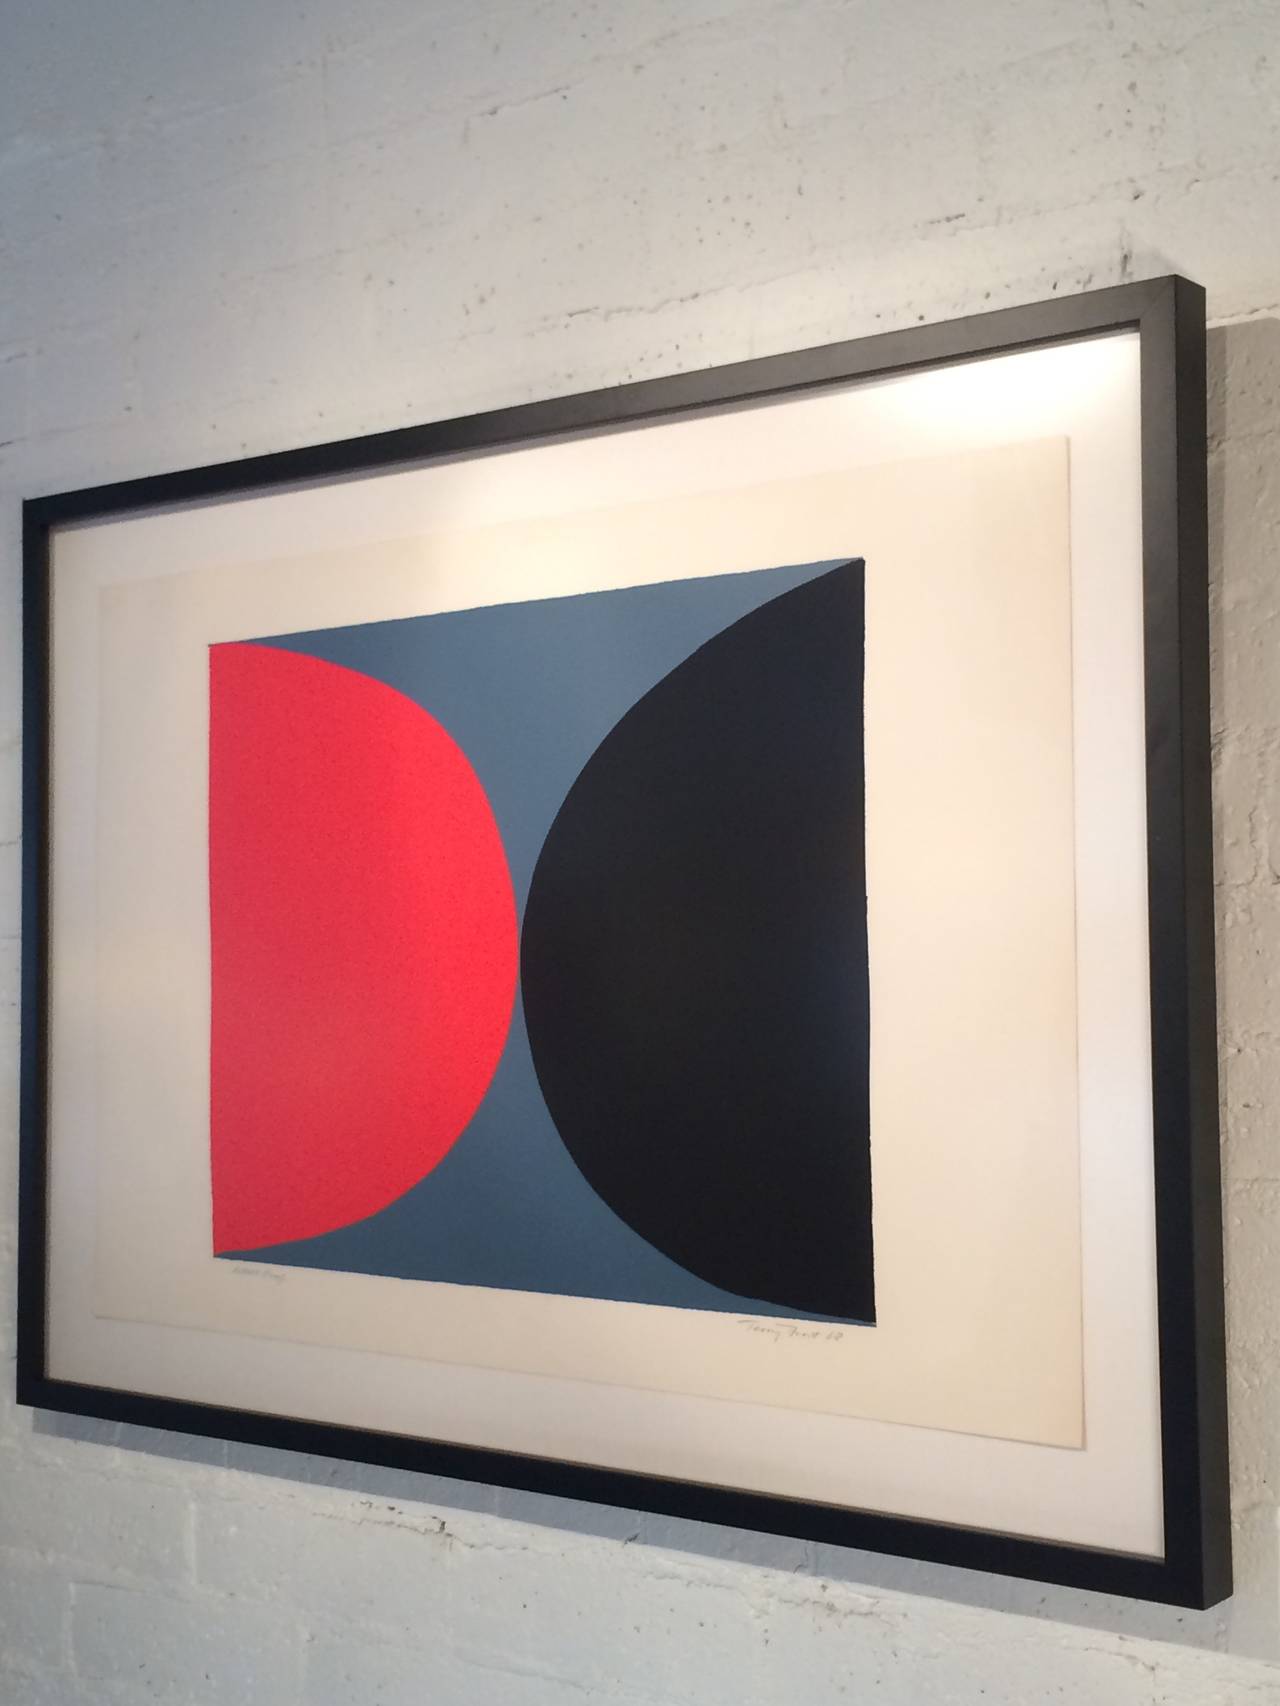 Abstract silkscreen by listed artist Sir Terry Frost (1915-2003)
signed and dated 1968.
Newly reframed in black lacquer and floated on a white linen background.